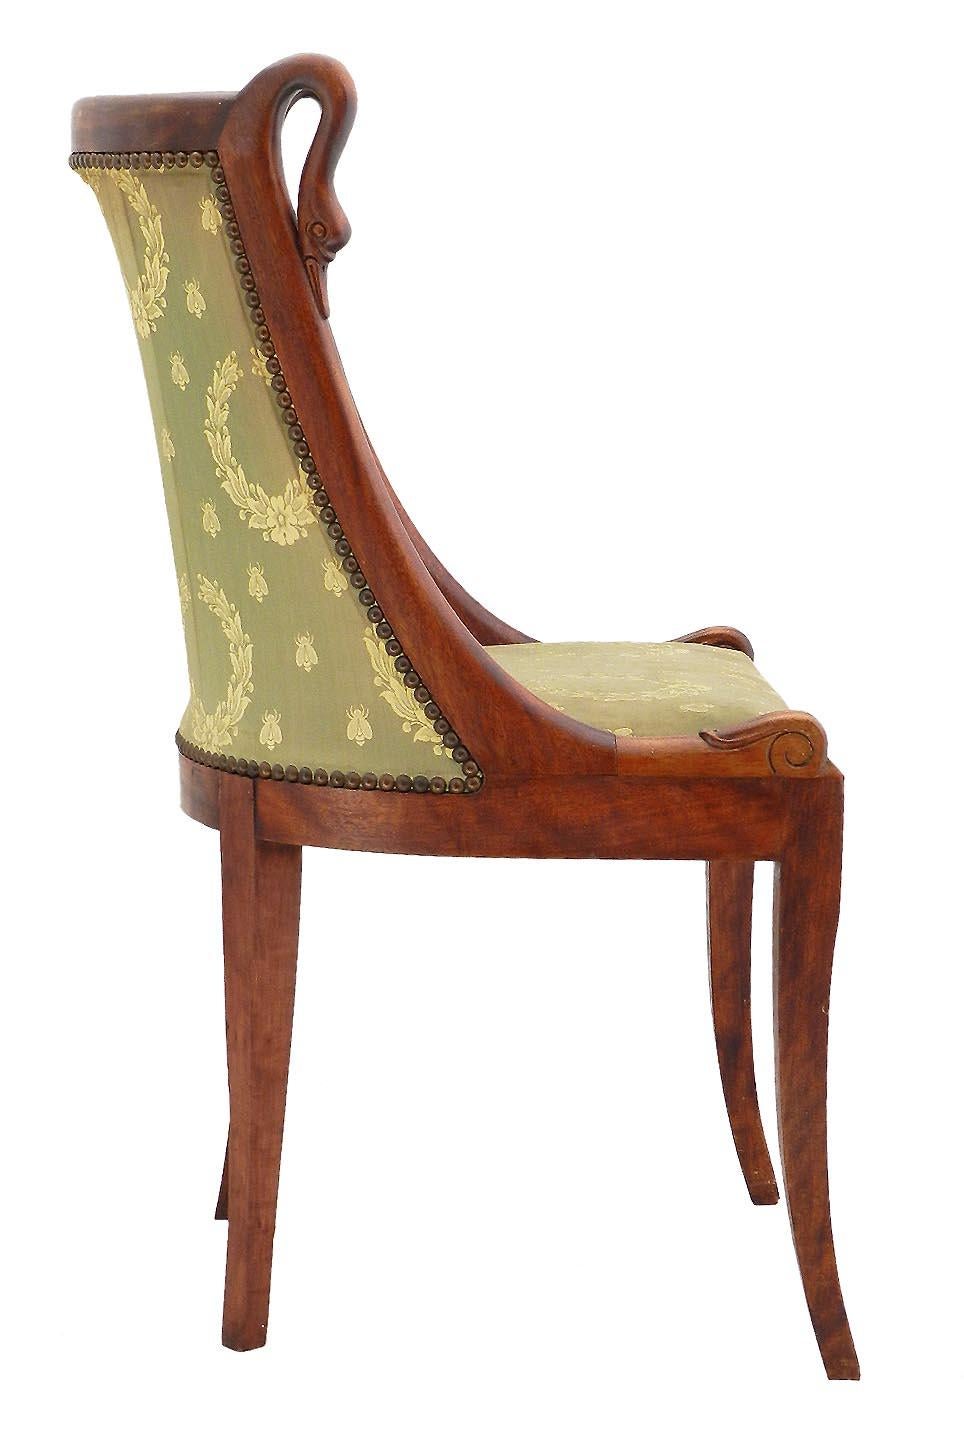 Six Empire Revival dining chairs French circa 1920 to recover
Swan neck
Gondola chairs
Very handsome and hard to find
Mahogany
In good condition solid and sturdy
Original covers to be changed to suit your interior
If you would like a very